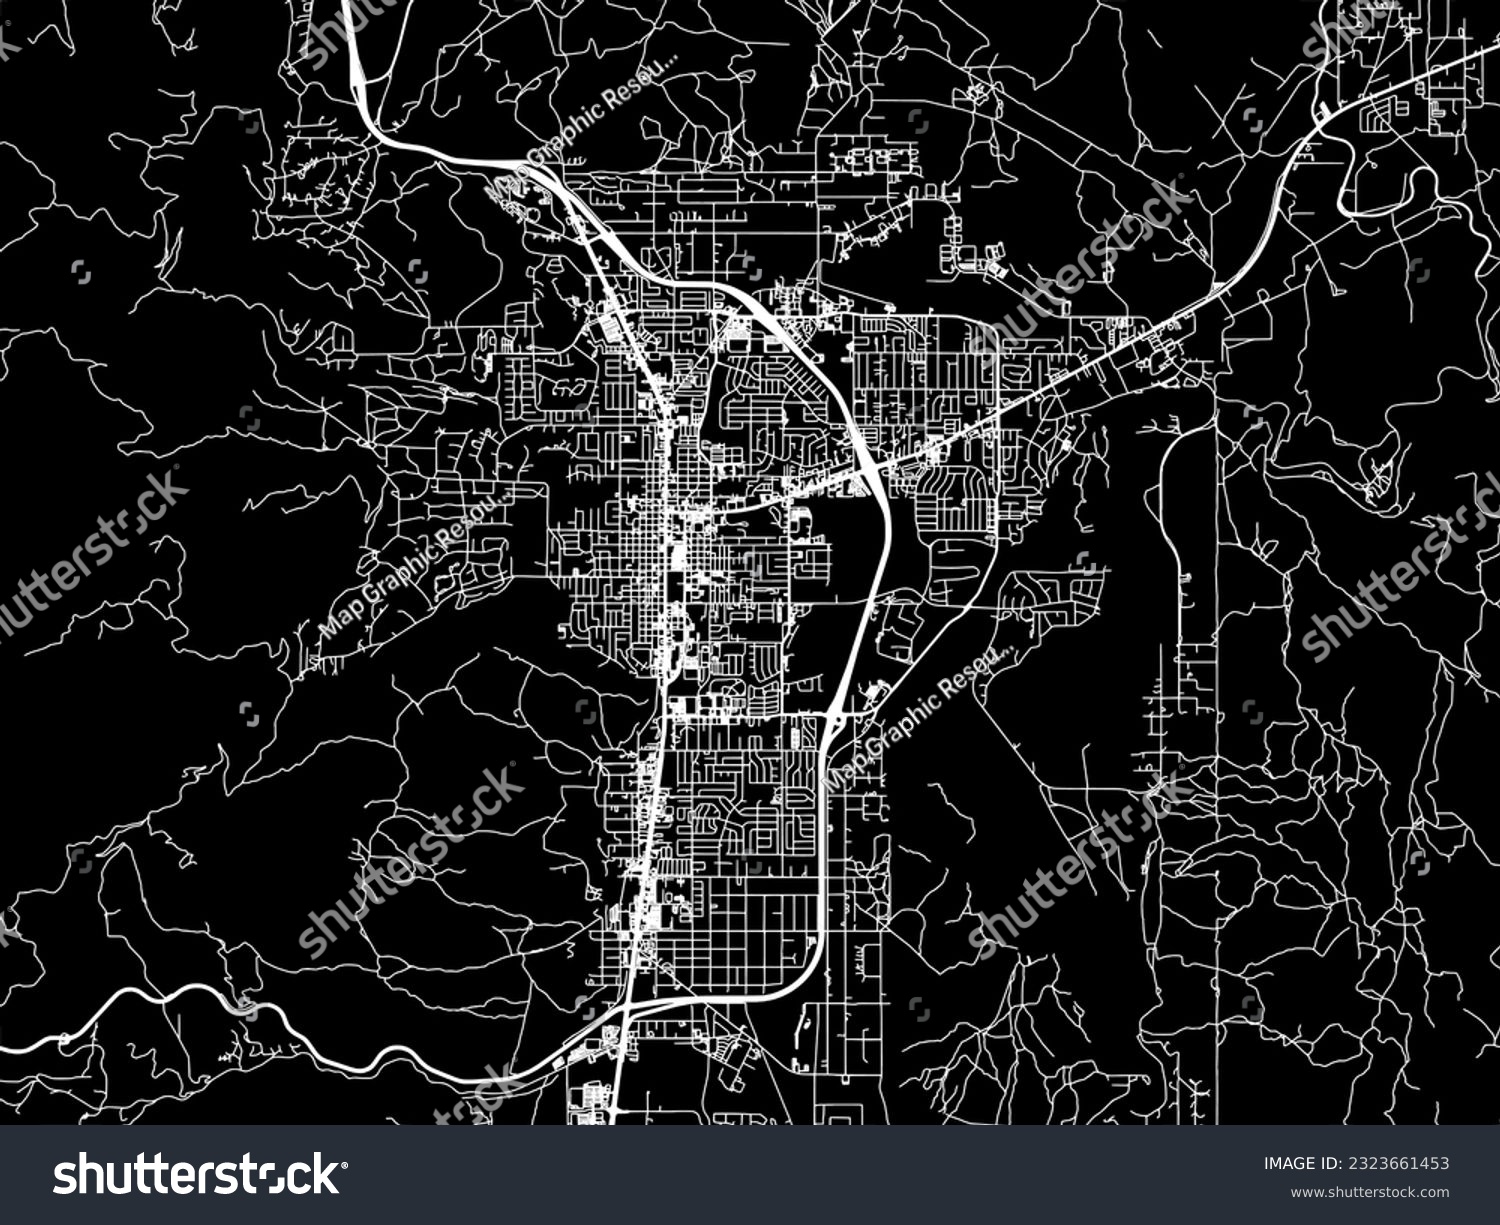 SVG of Vector city map of Carson City Nevada in the United States of America with white roads isolated on a black background. svg